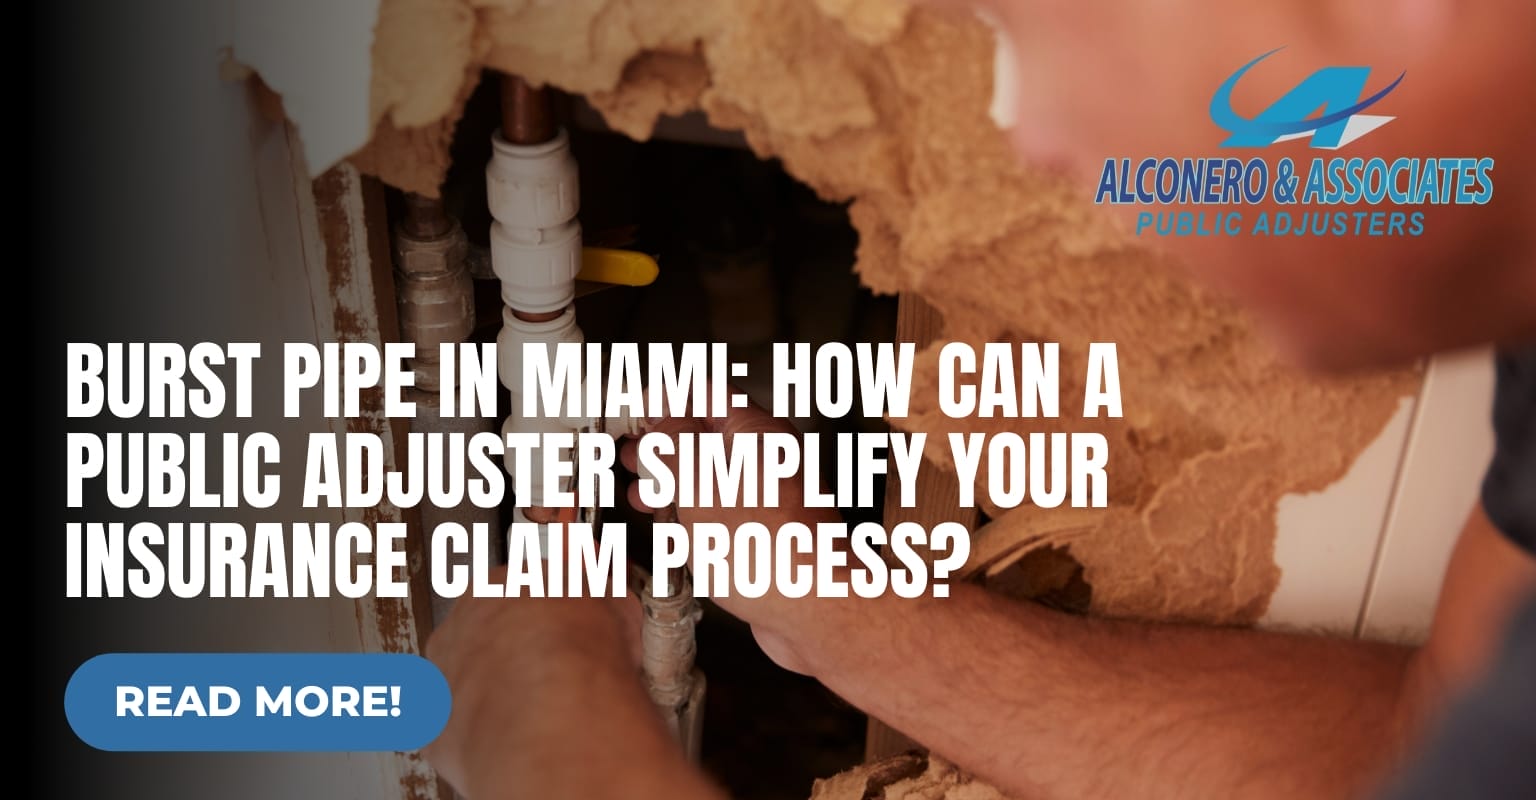 Burst Pipe in Miami: How Can a Public Adjuster Simplify Your Insurance Claim Process?